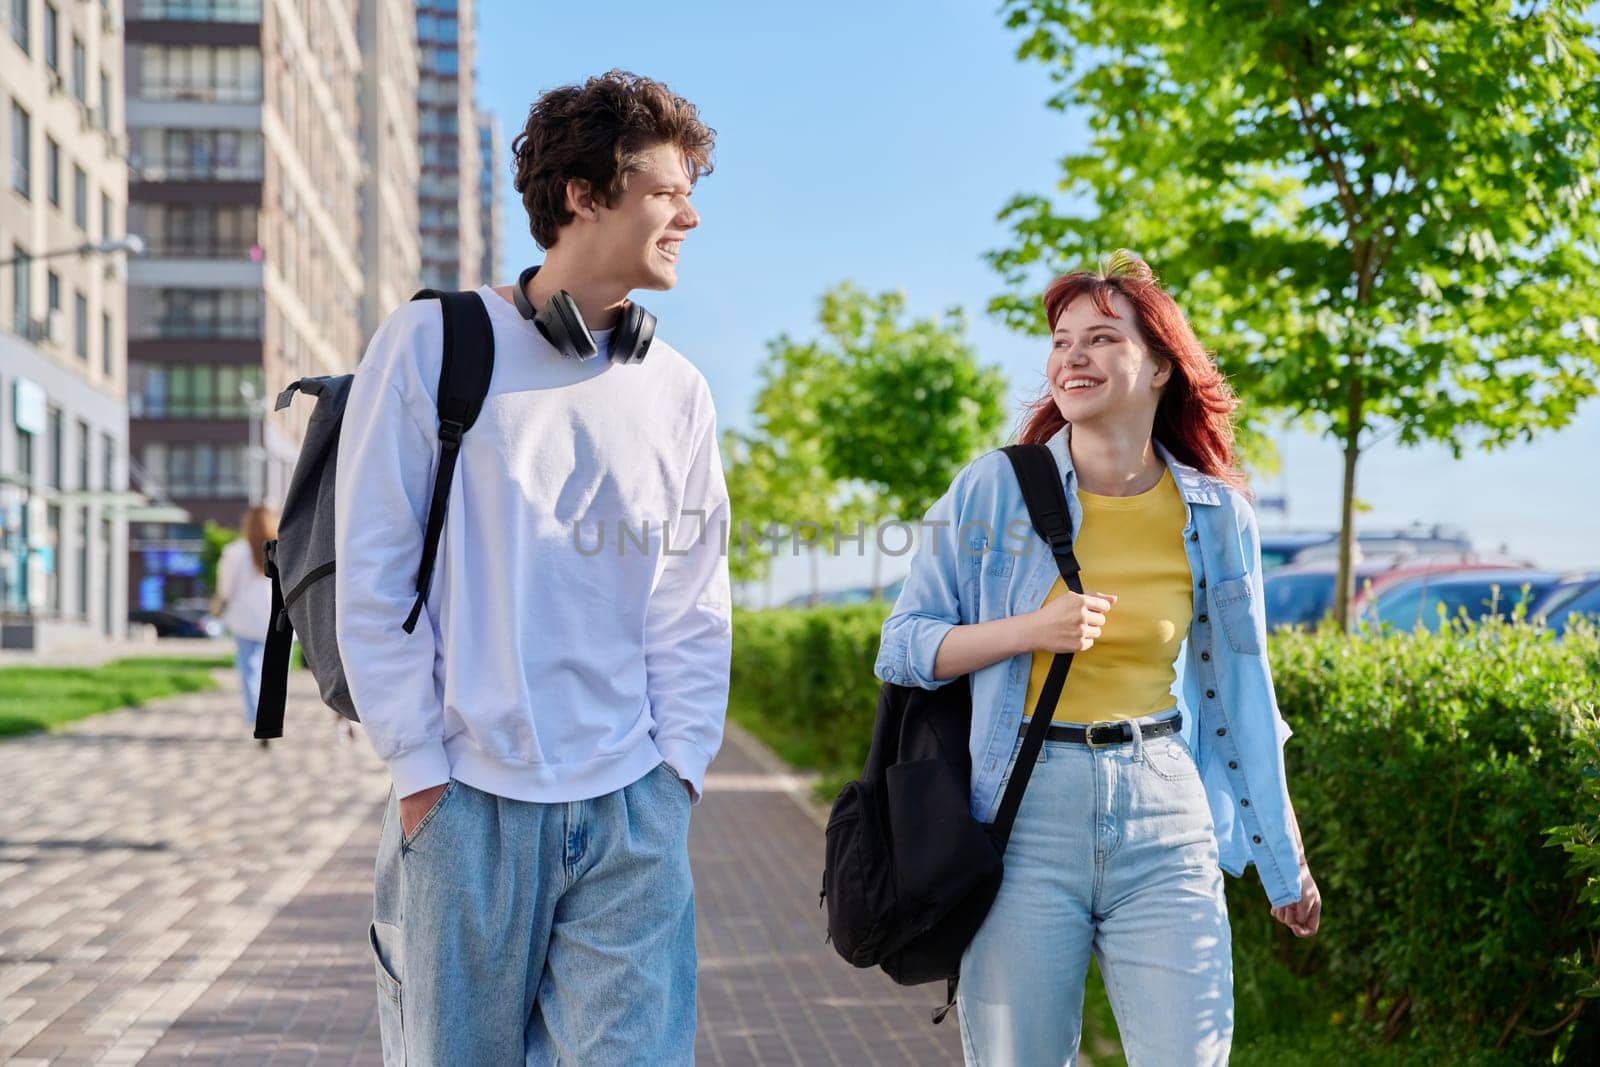 Guy and girl, university students walking together along street of city by VH-studio